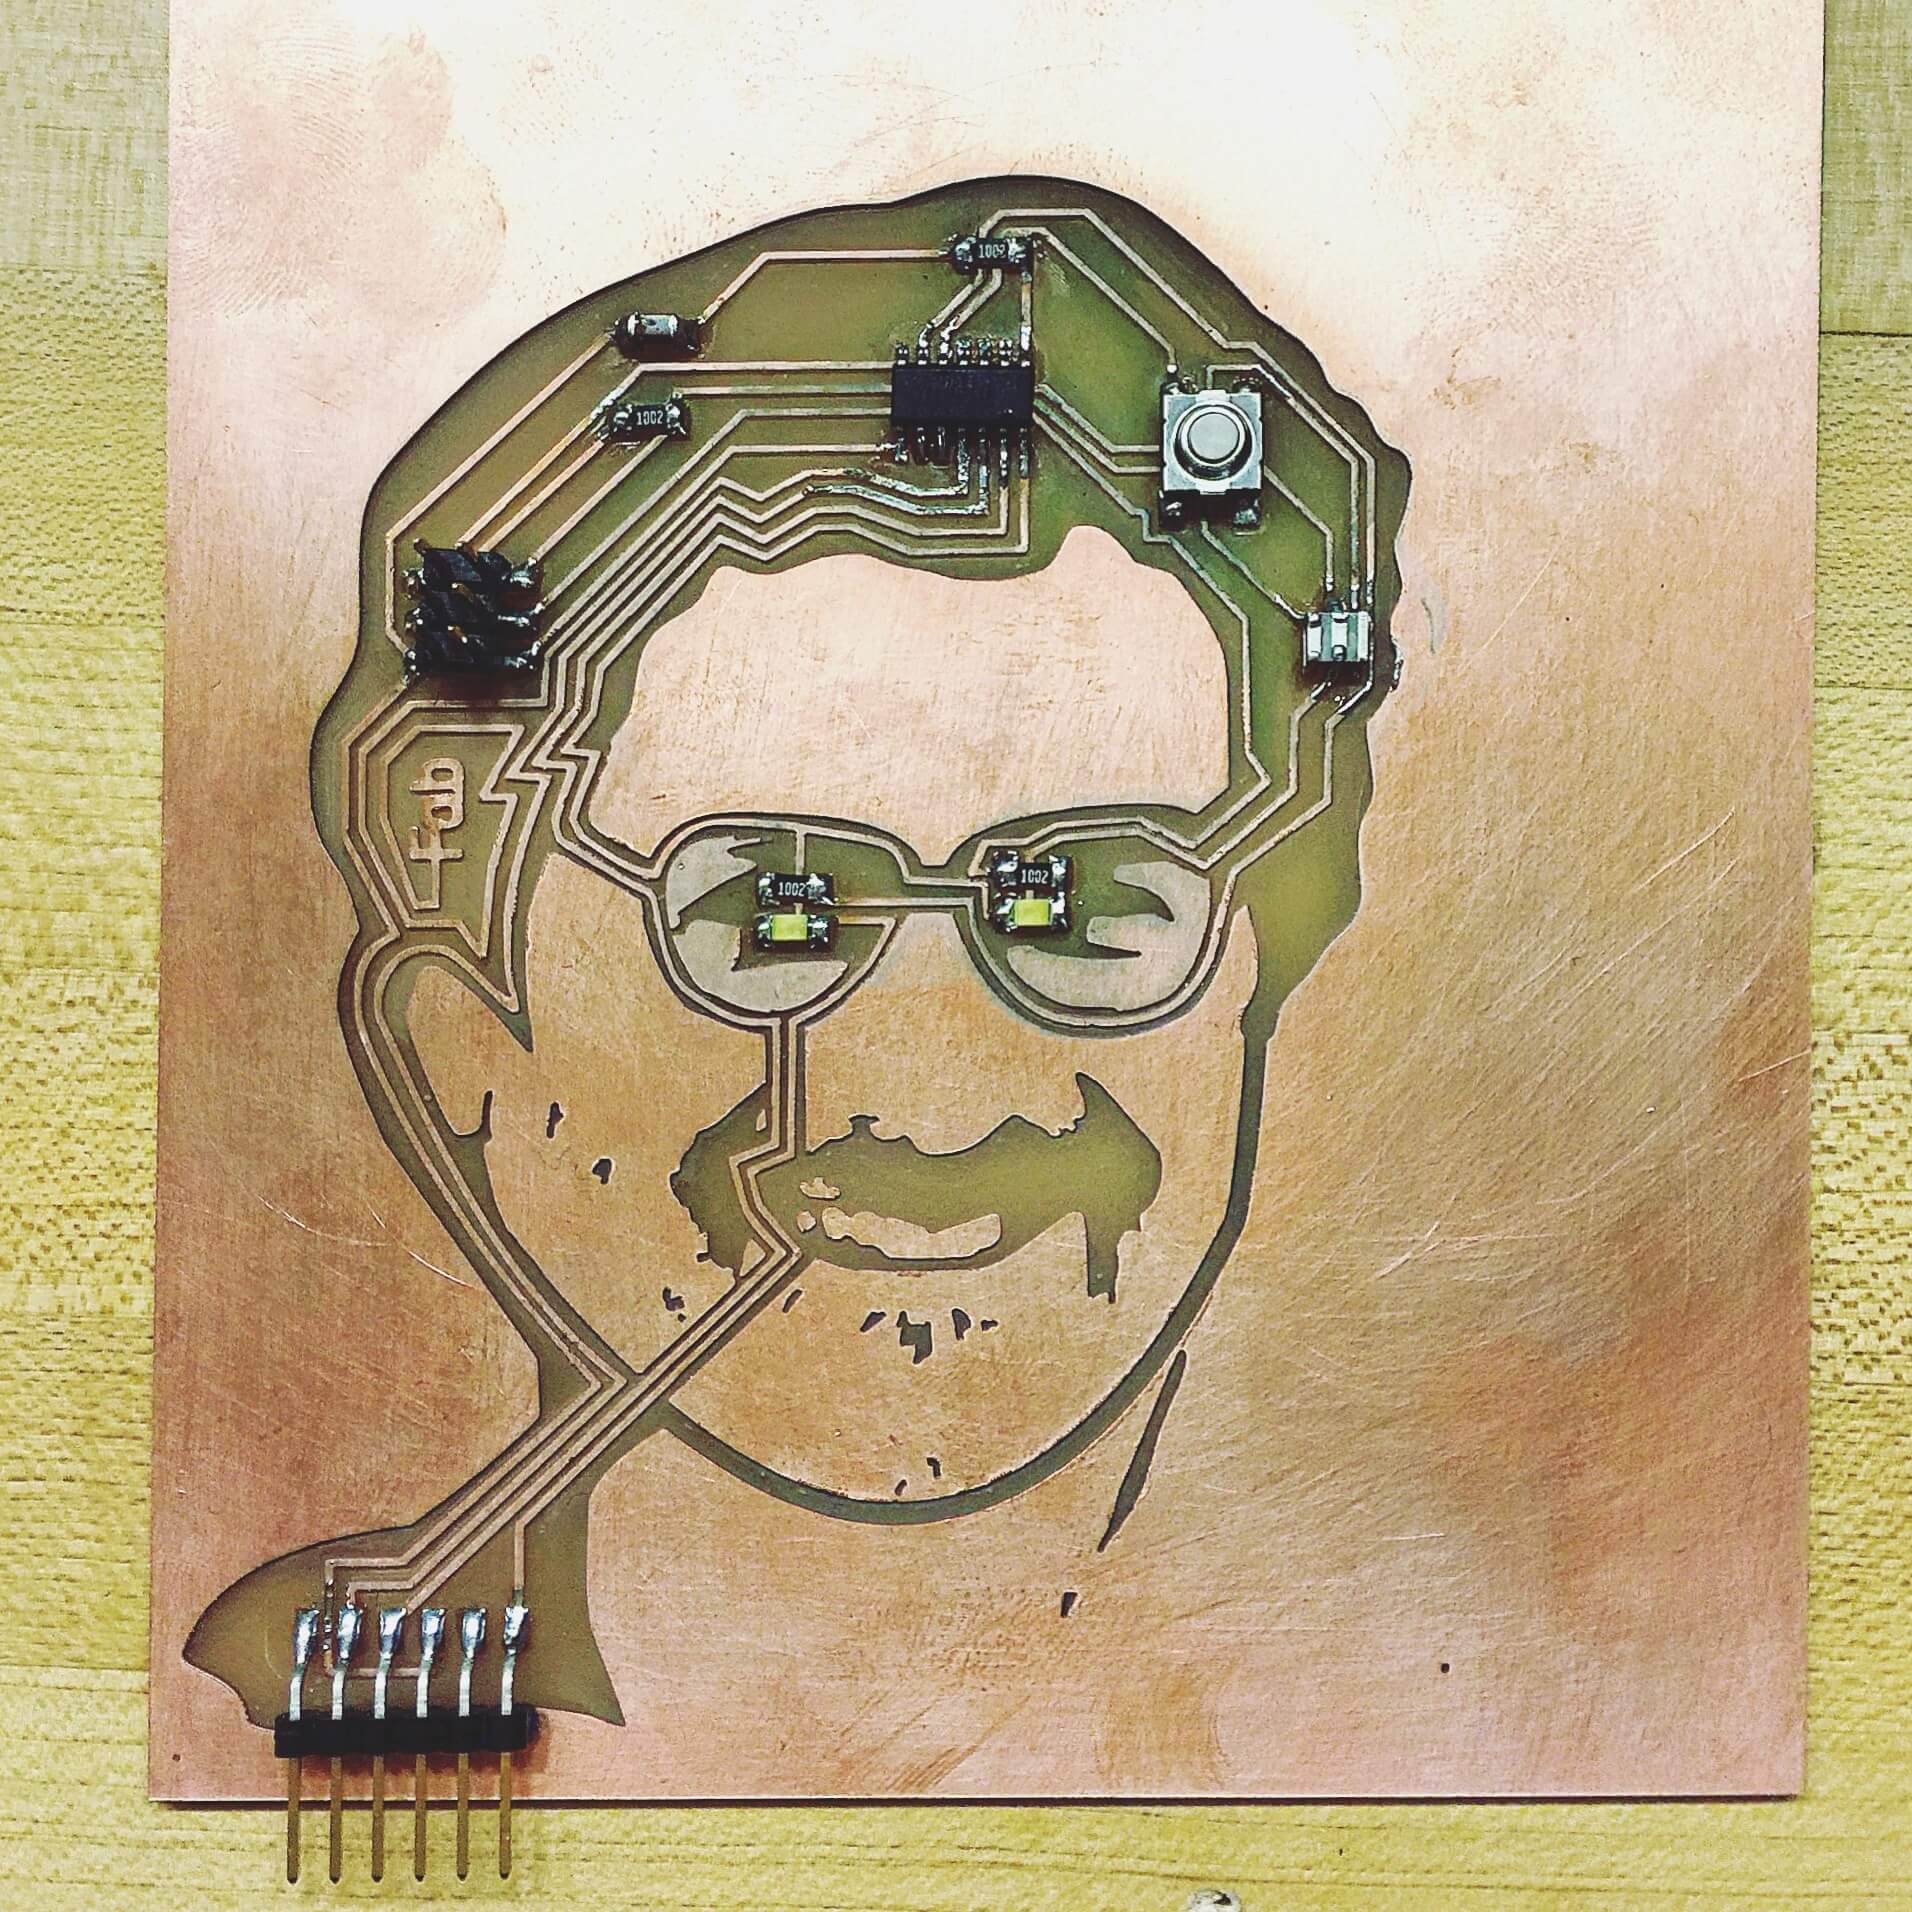 Followed by soldering each symbolic component onto the physical board to give it electrical function.